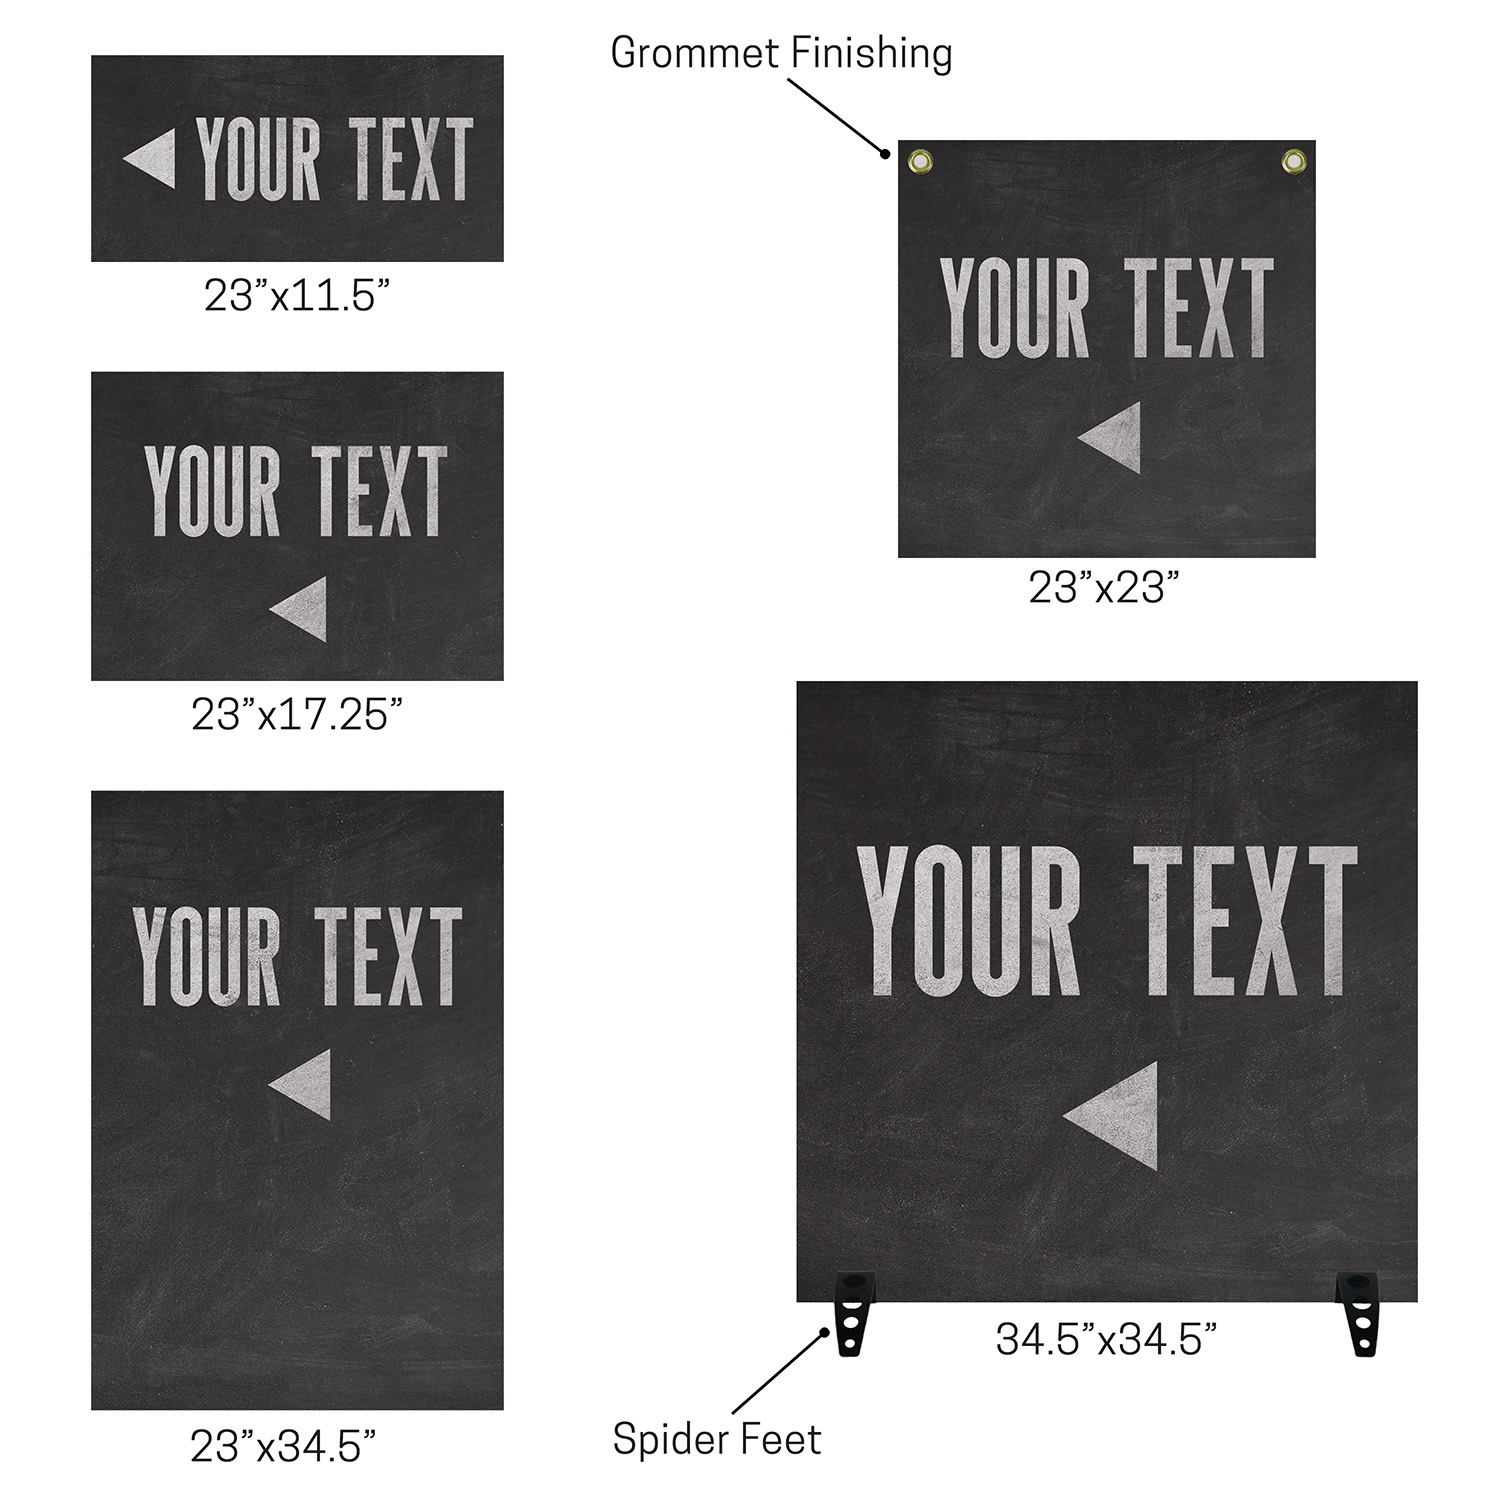 Rigid Signs, General Blue Your Text, 23 x 17.25 2